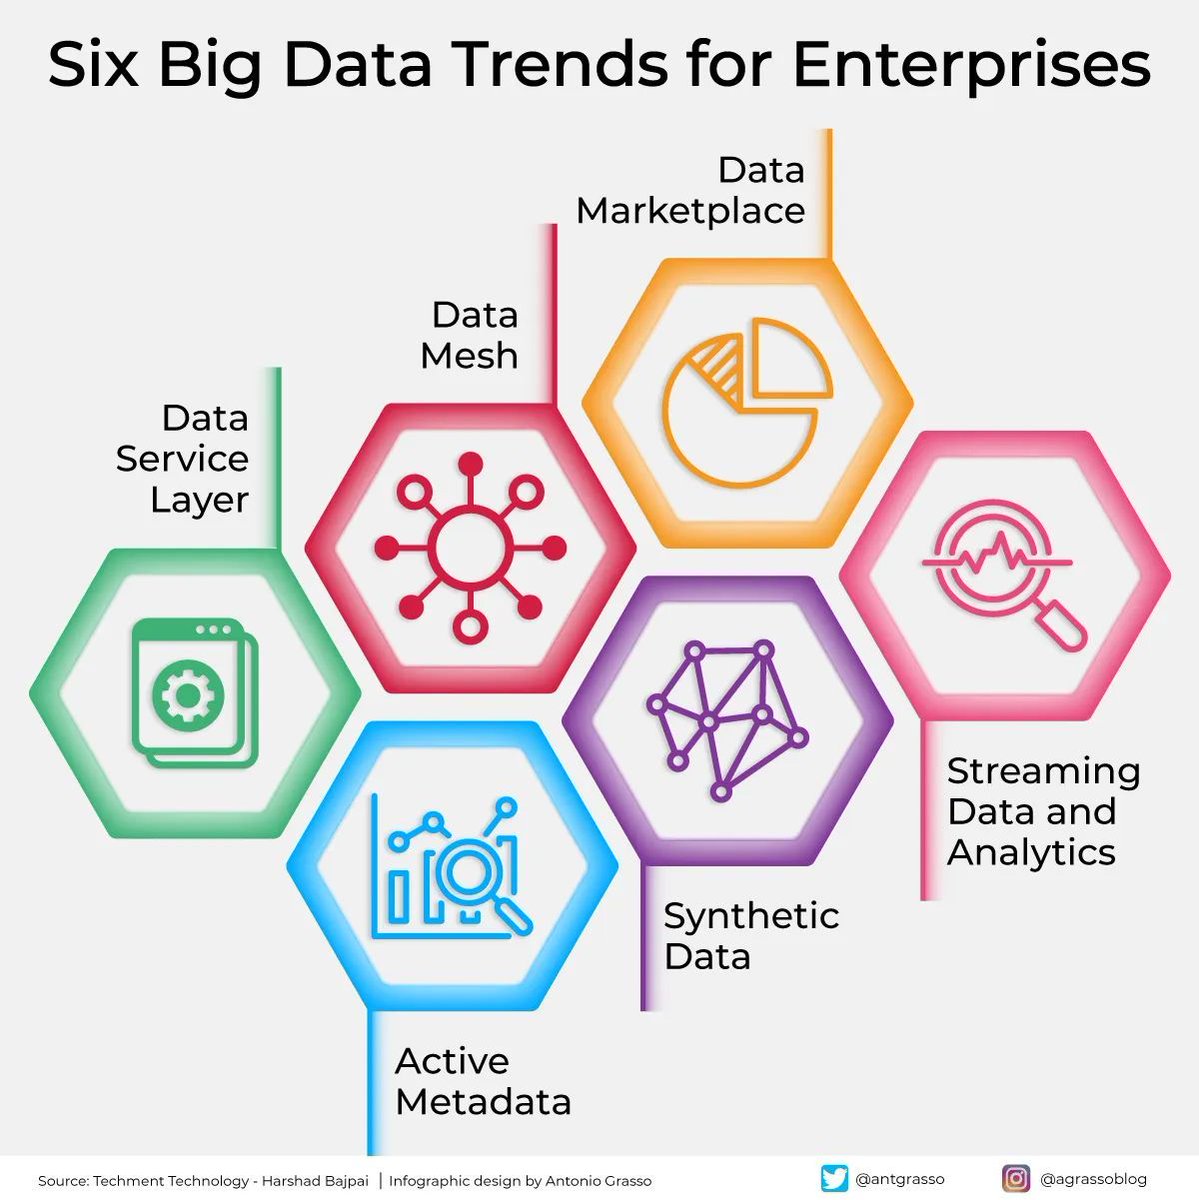 Big data refers to large amounts of data from various sources, such as sensors, mobile devices, social media, online transactions, and more. Big data analytics aims to extract knowledge, patterns, and insights data can provide. #BigData #Analytics